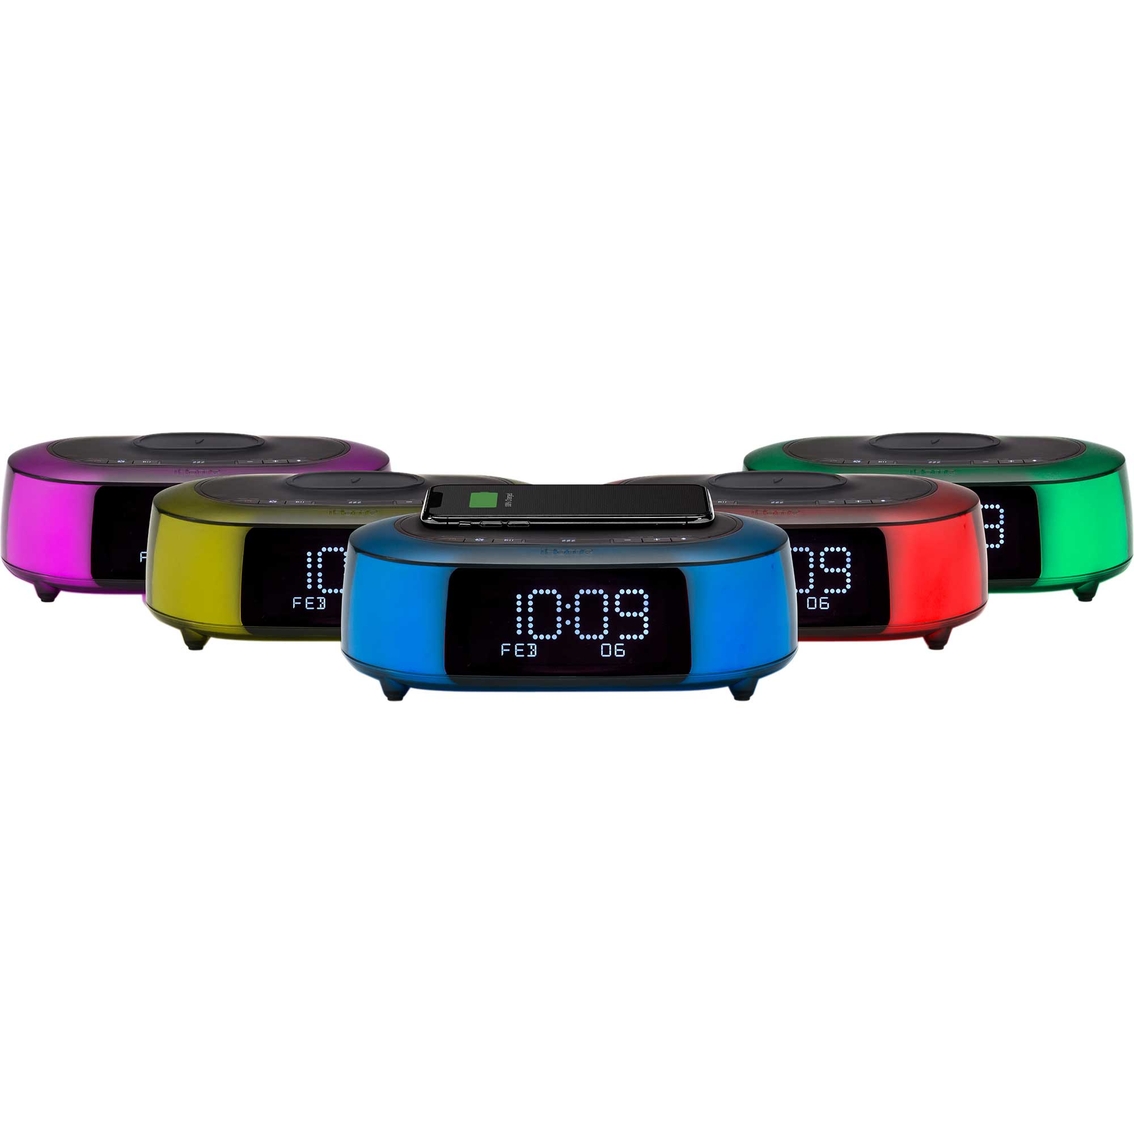 iHome TimeBoost Bluetooth Speaker with Alarm Clock and Qi Wireless Charging - Image 10 of 10